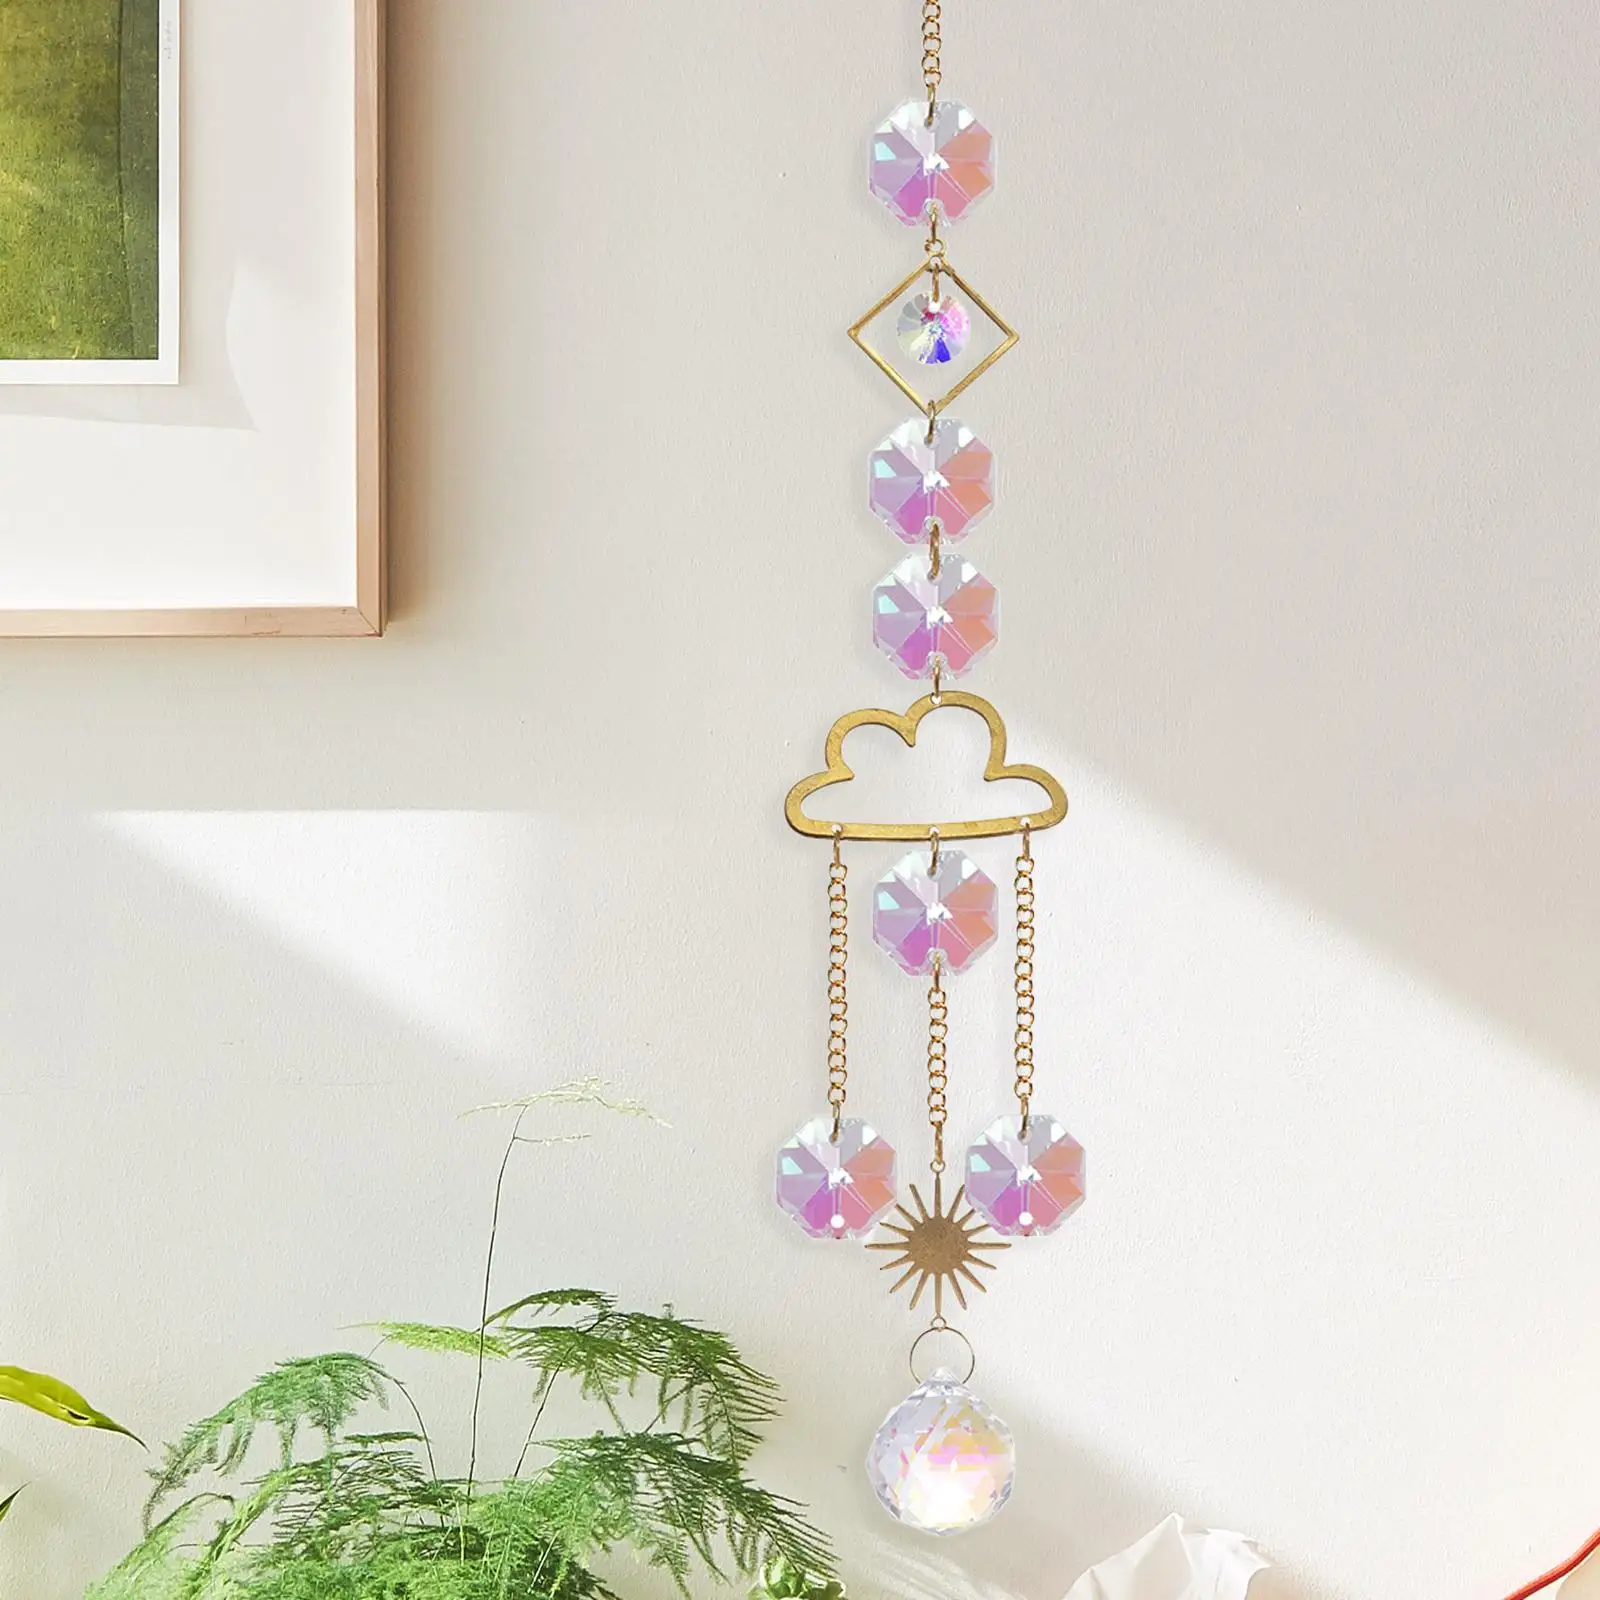 Hanging  Decor Ornaments Gold Decoration Gifts Crystal Rainbow  Pendant for Windows Garden Courtyard Yard Outside